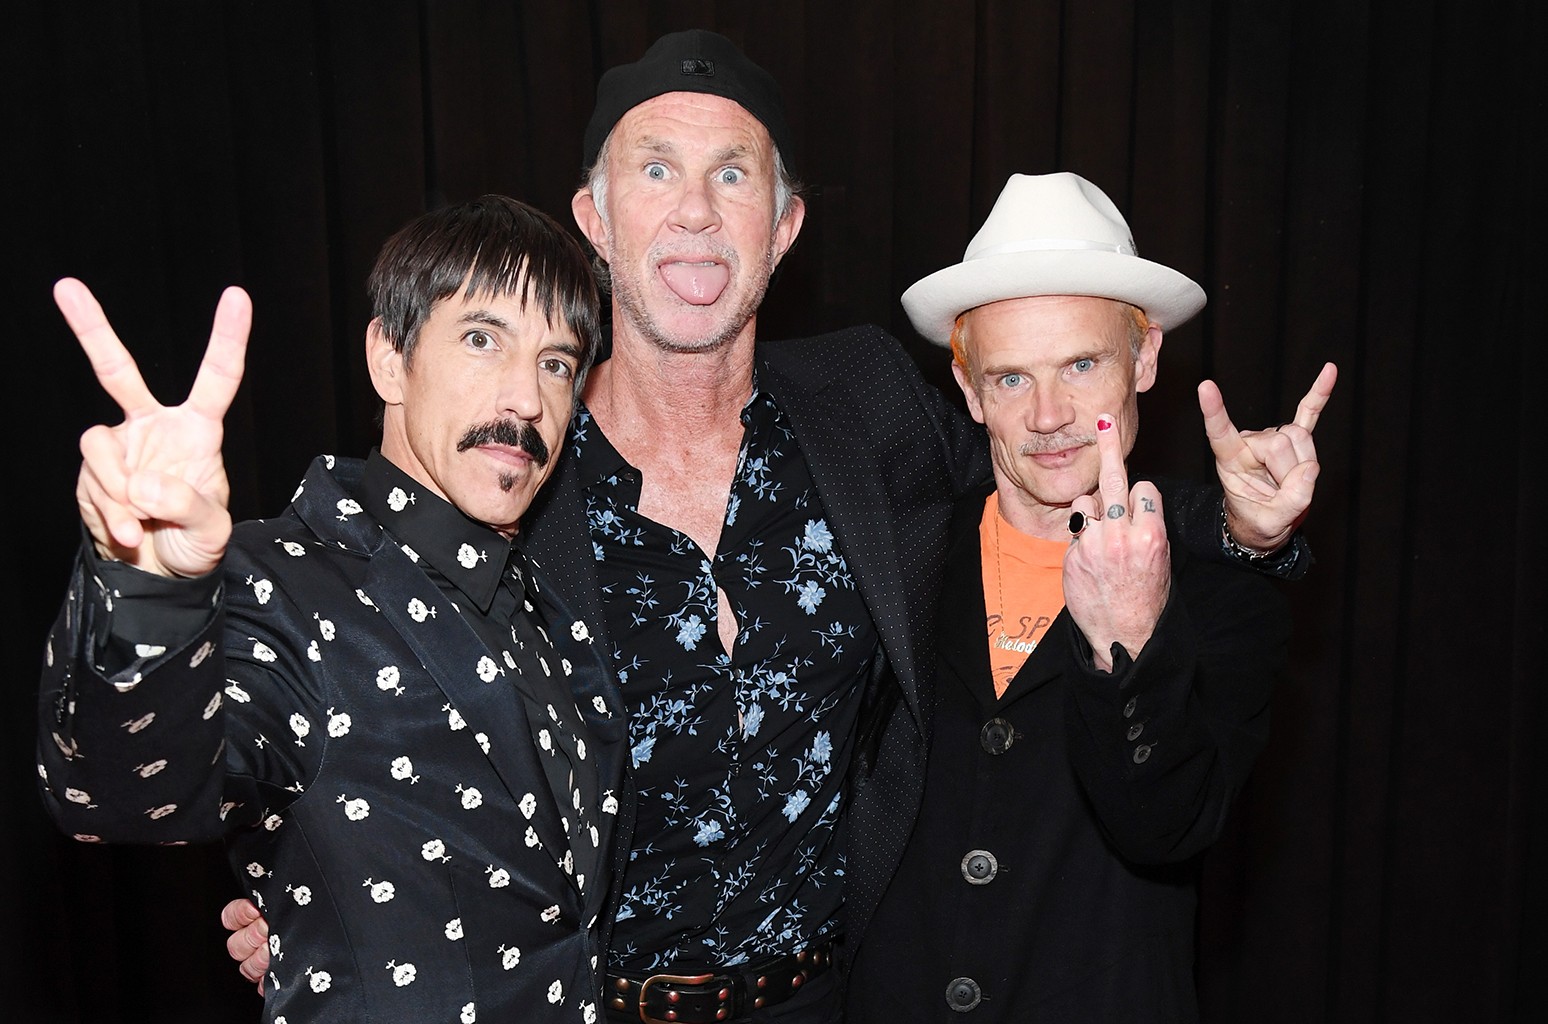 Red Hot Chili Peppers, The Strokes & King Princess at FargoDome